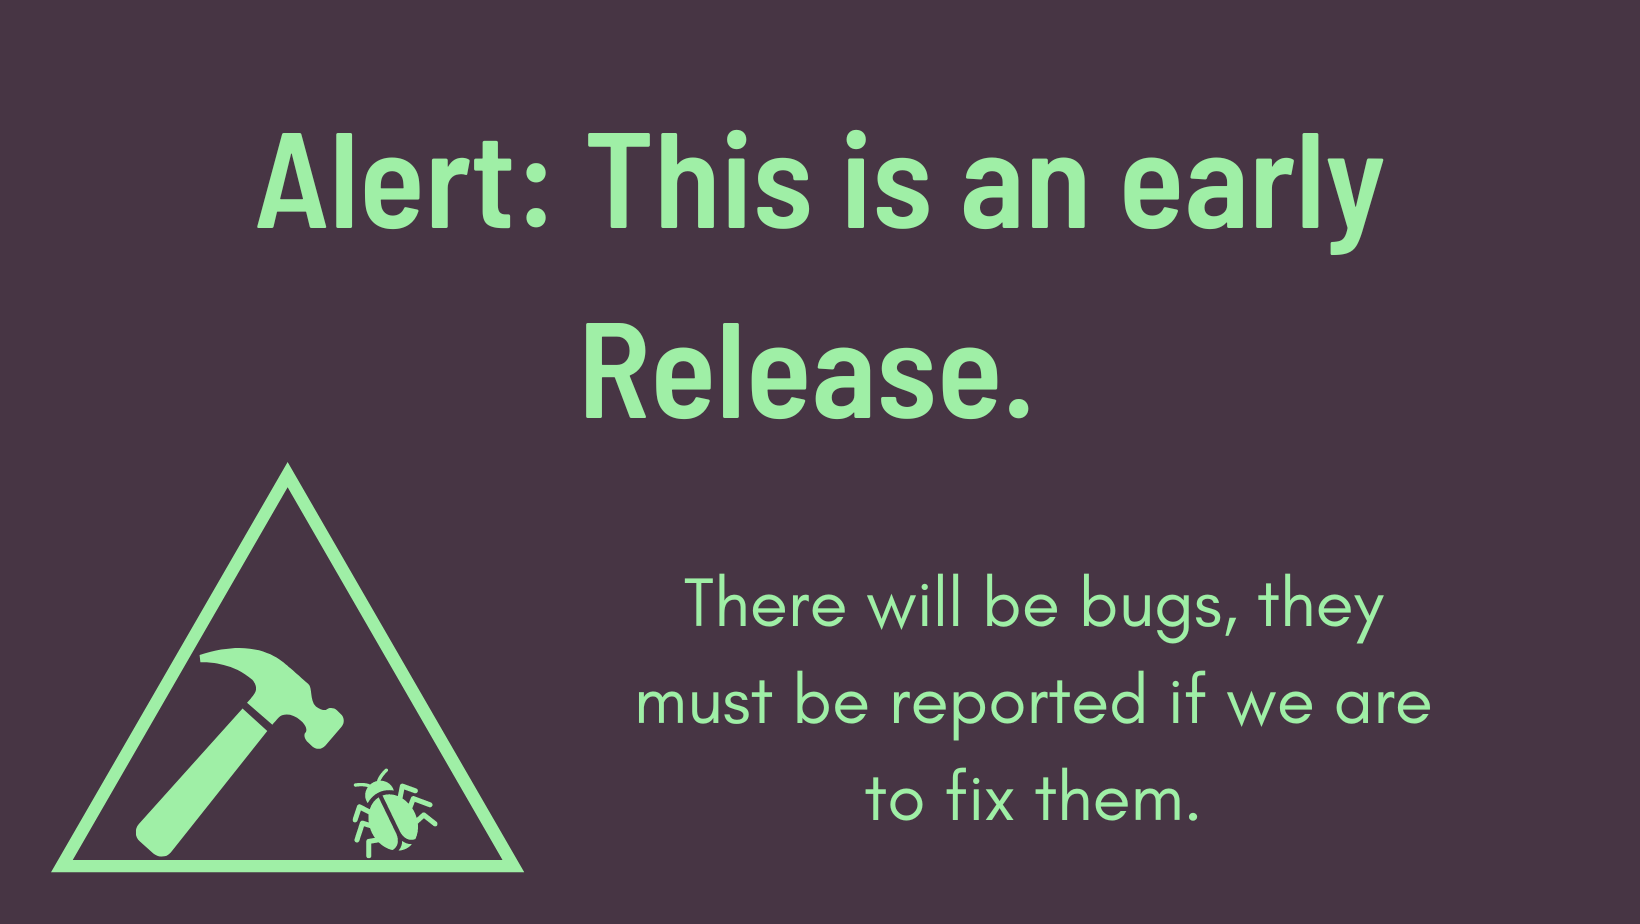 There will be bugs in this early release, please report them to be fixed